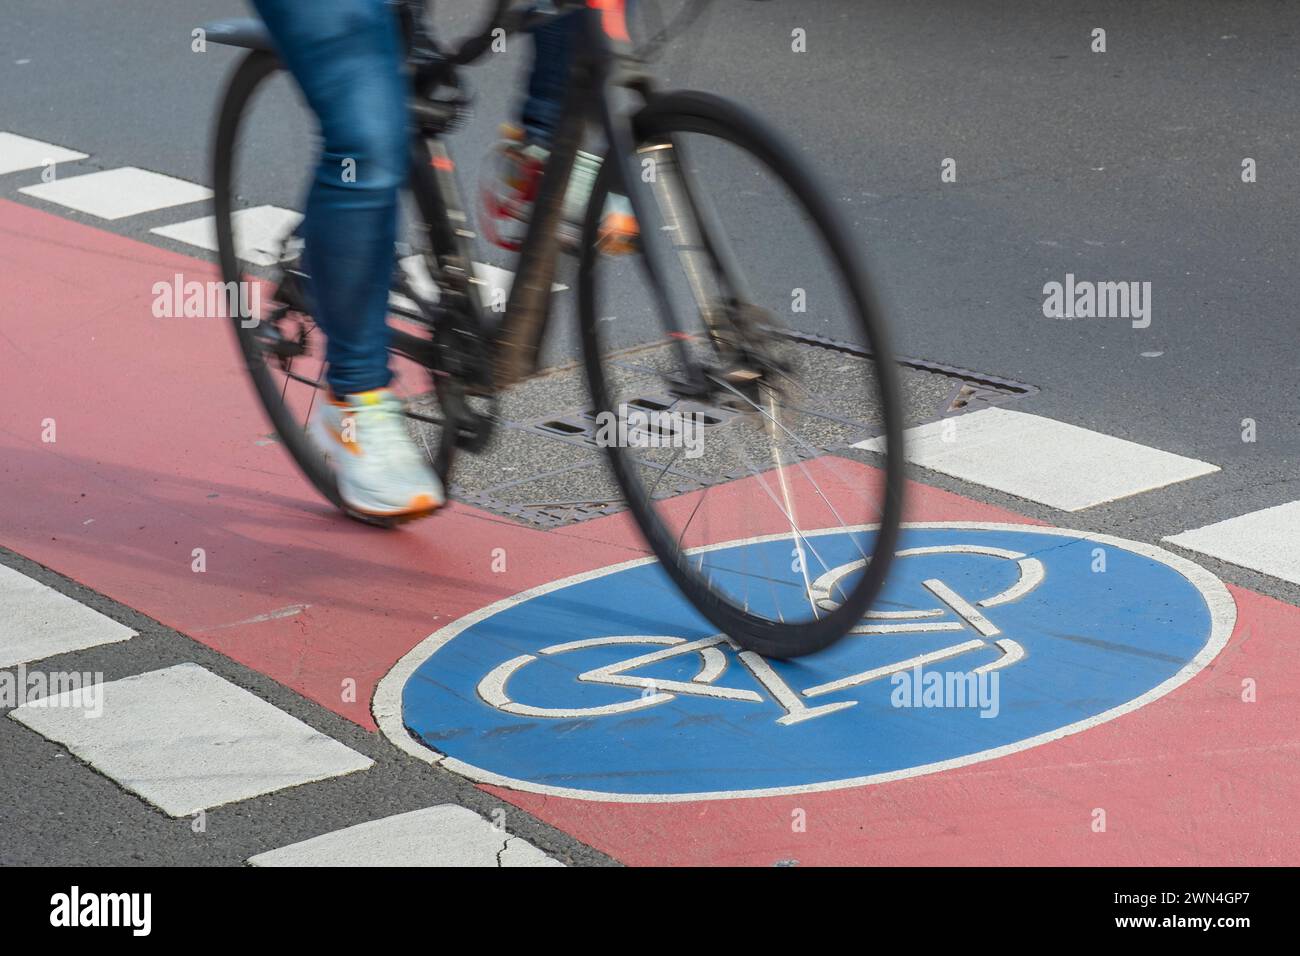 Blurred bicycle on a cycle path with a blue cycle path symbol Stock Photo